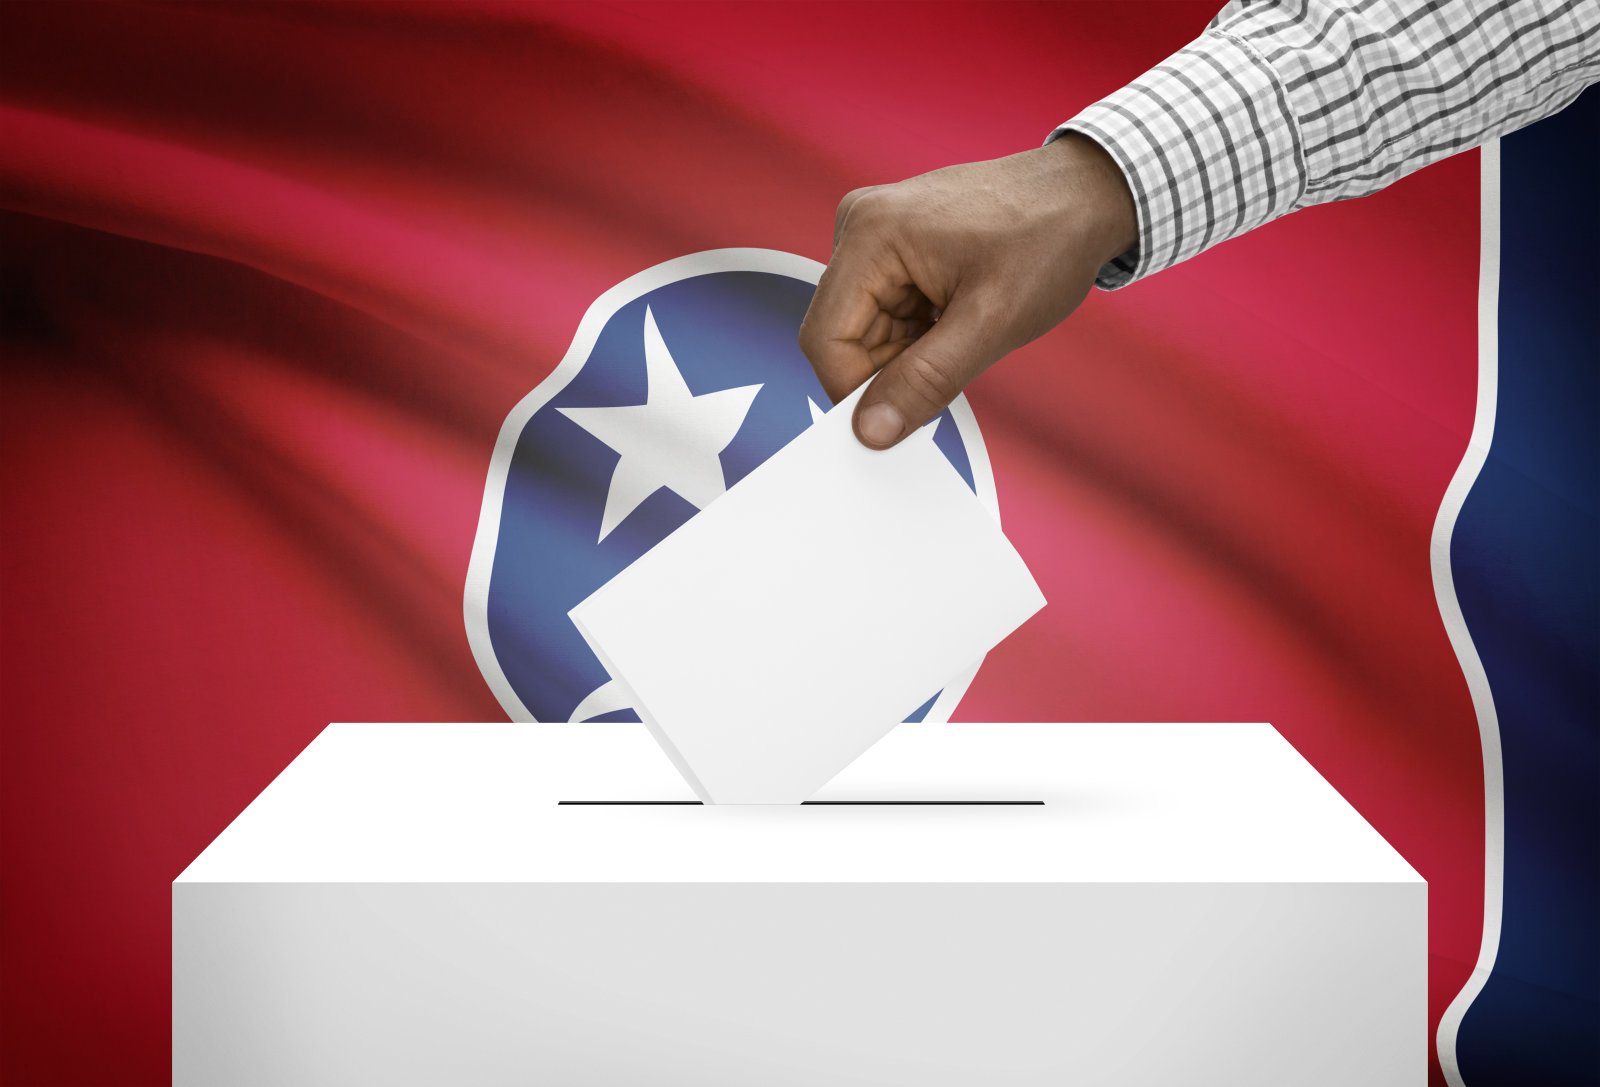 Voting concept - Ballot box with US state flag on background - Tennessee